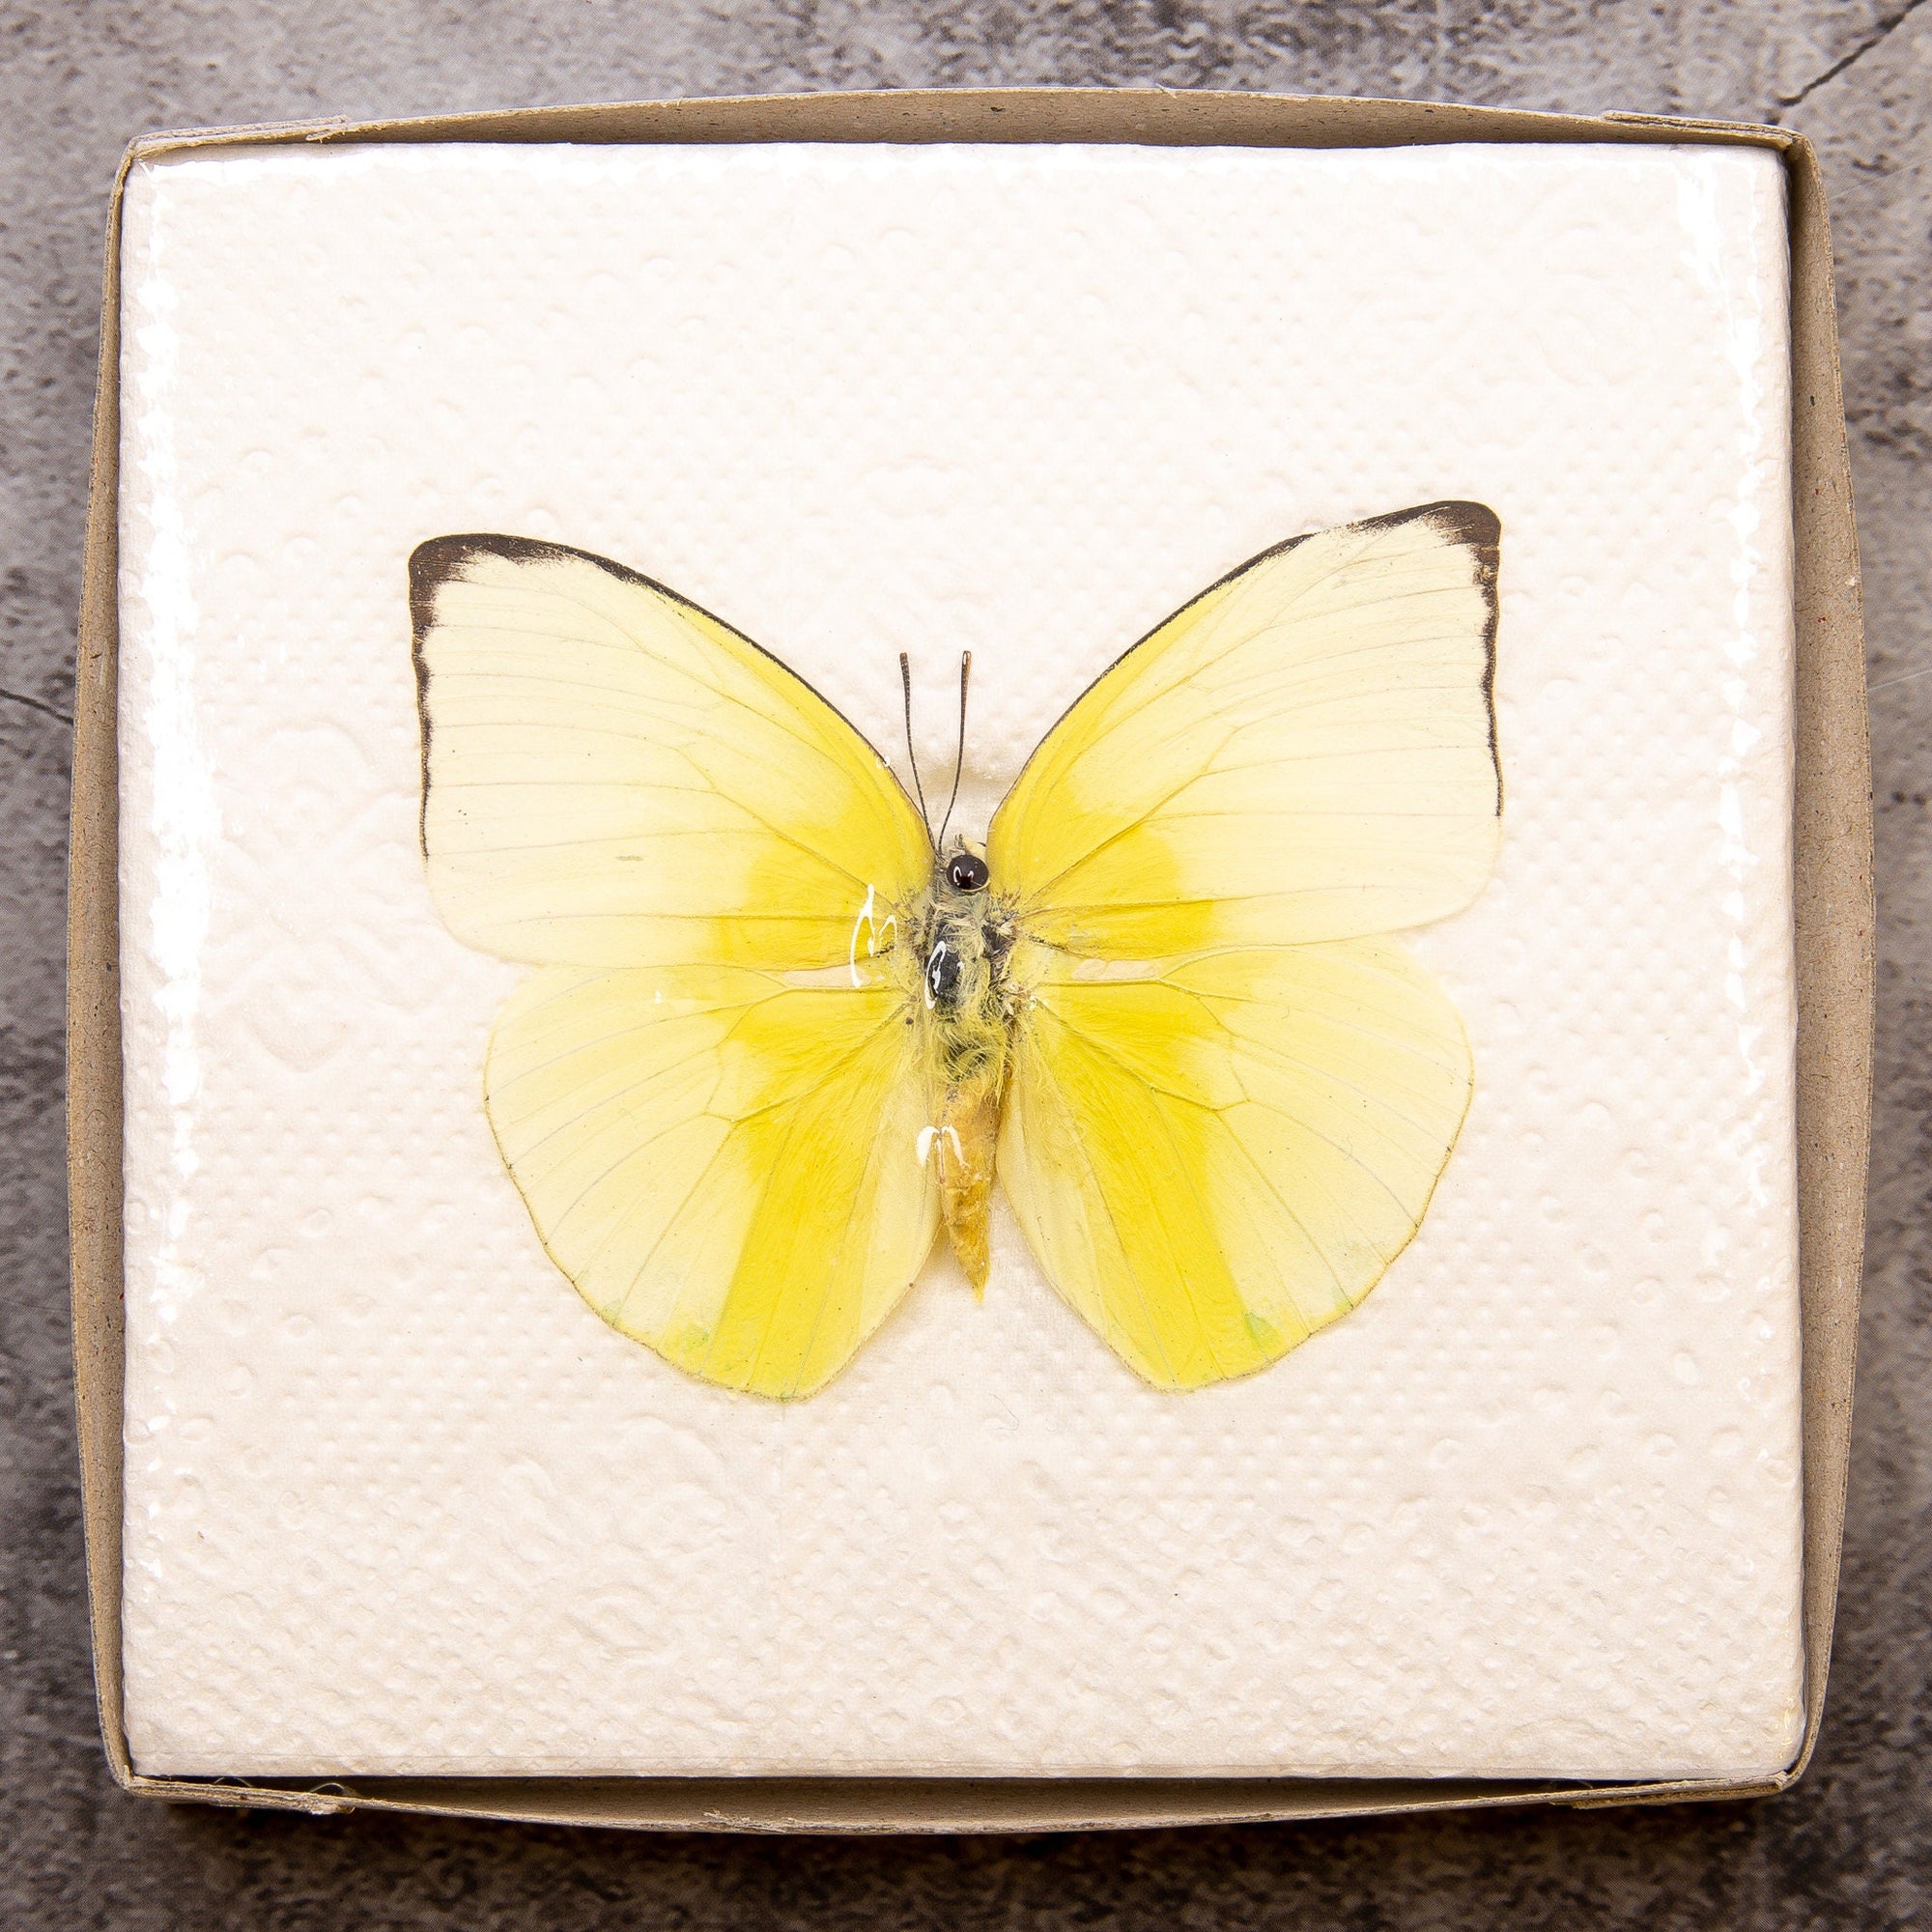 Pack of 2 Lemon Emigrant Butterflies (Catopsilia pomona) WINGS-SPREAD, Ethically Sourced Preserved Specimens for Collecting & Art